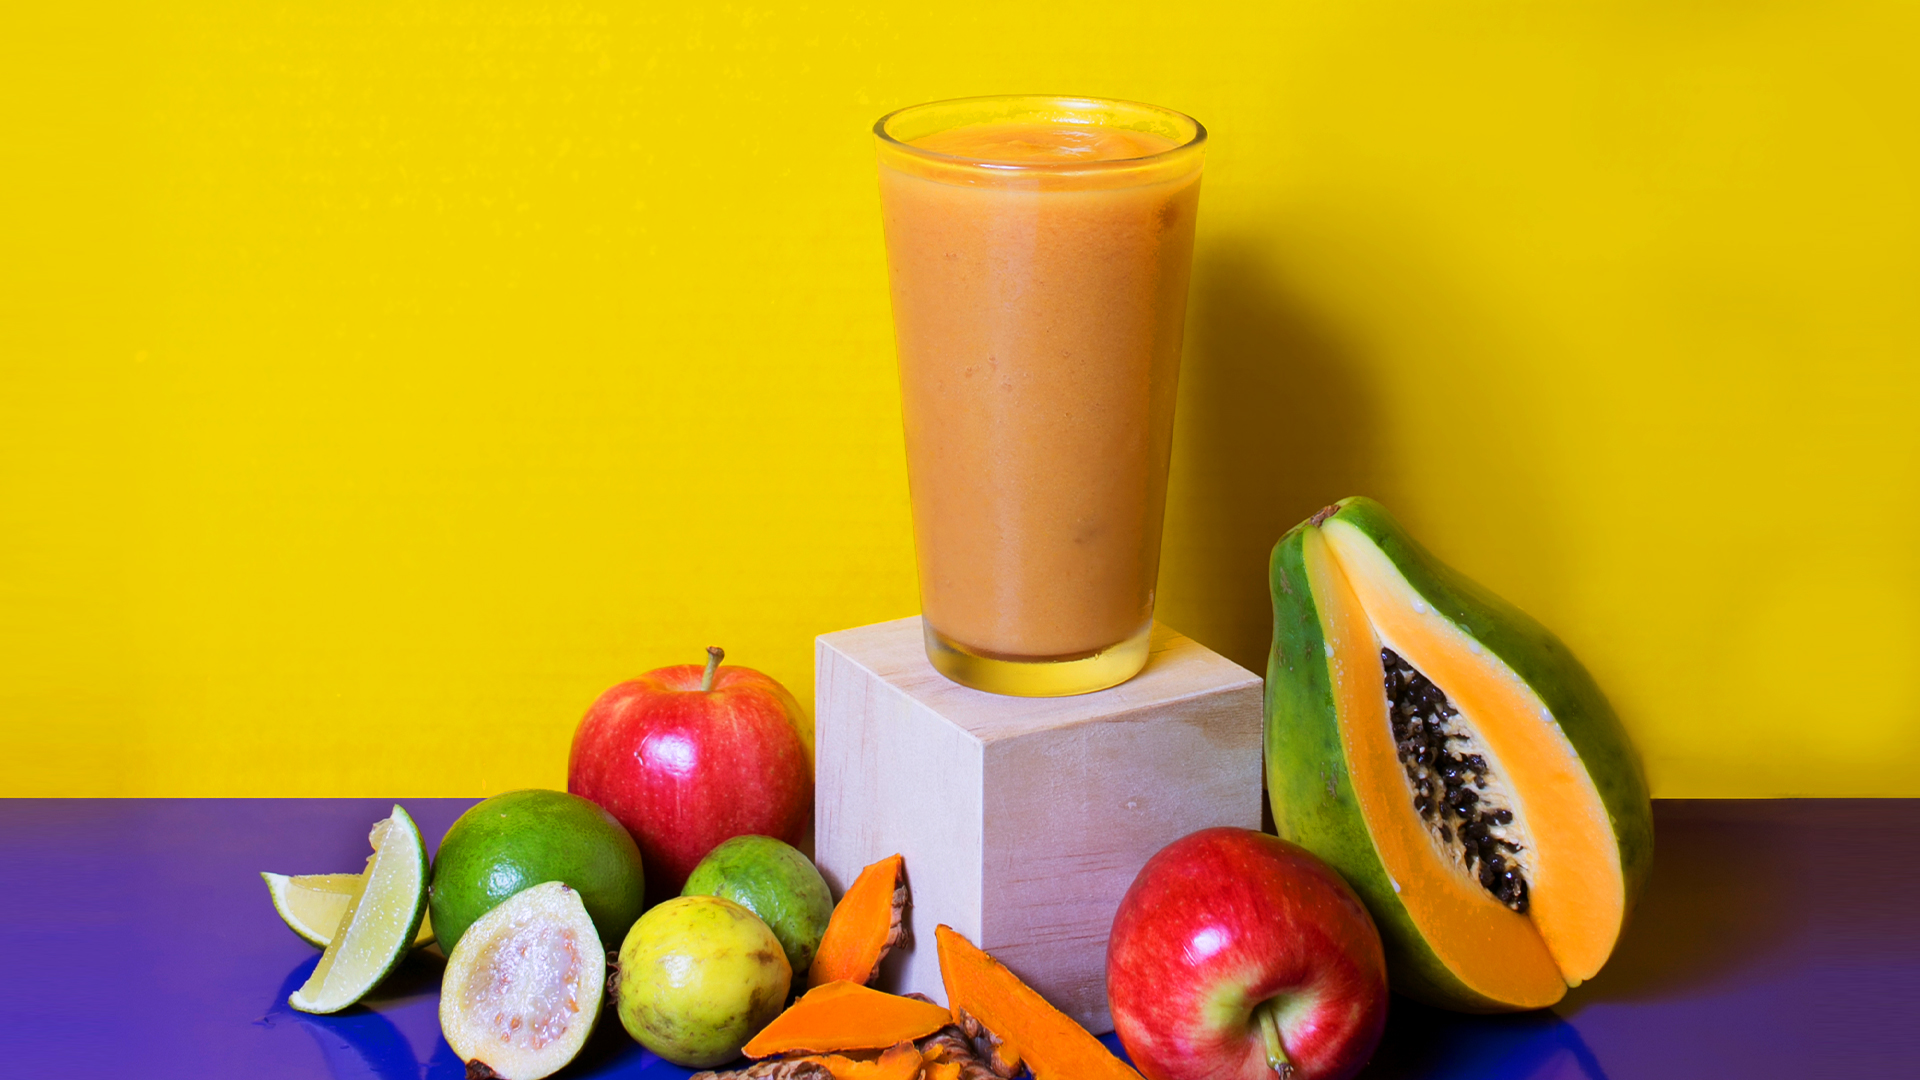 Get a Smoothie Machine in Your Location: Now Accepting Applications